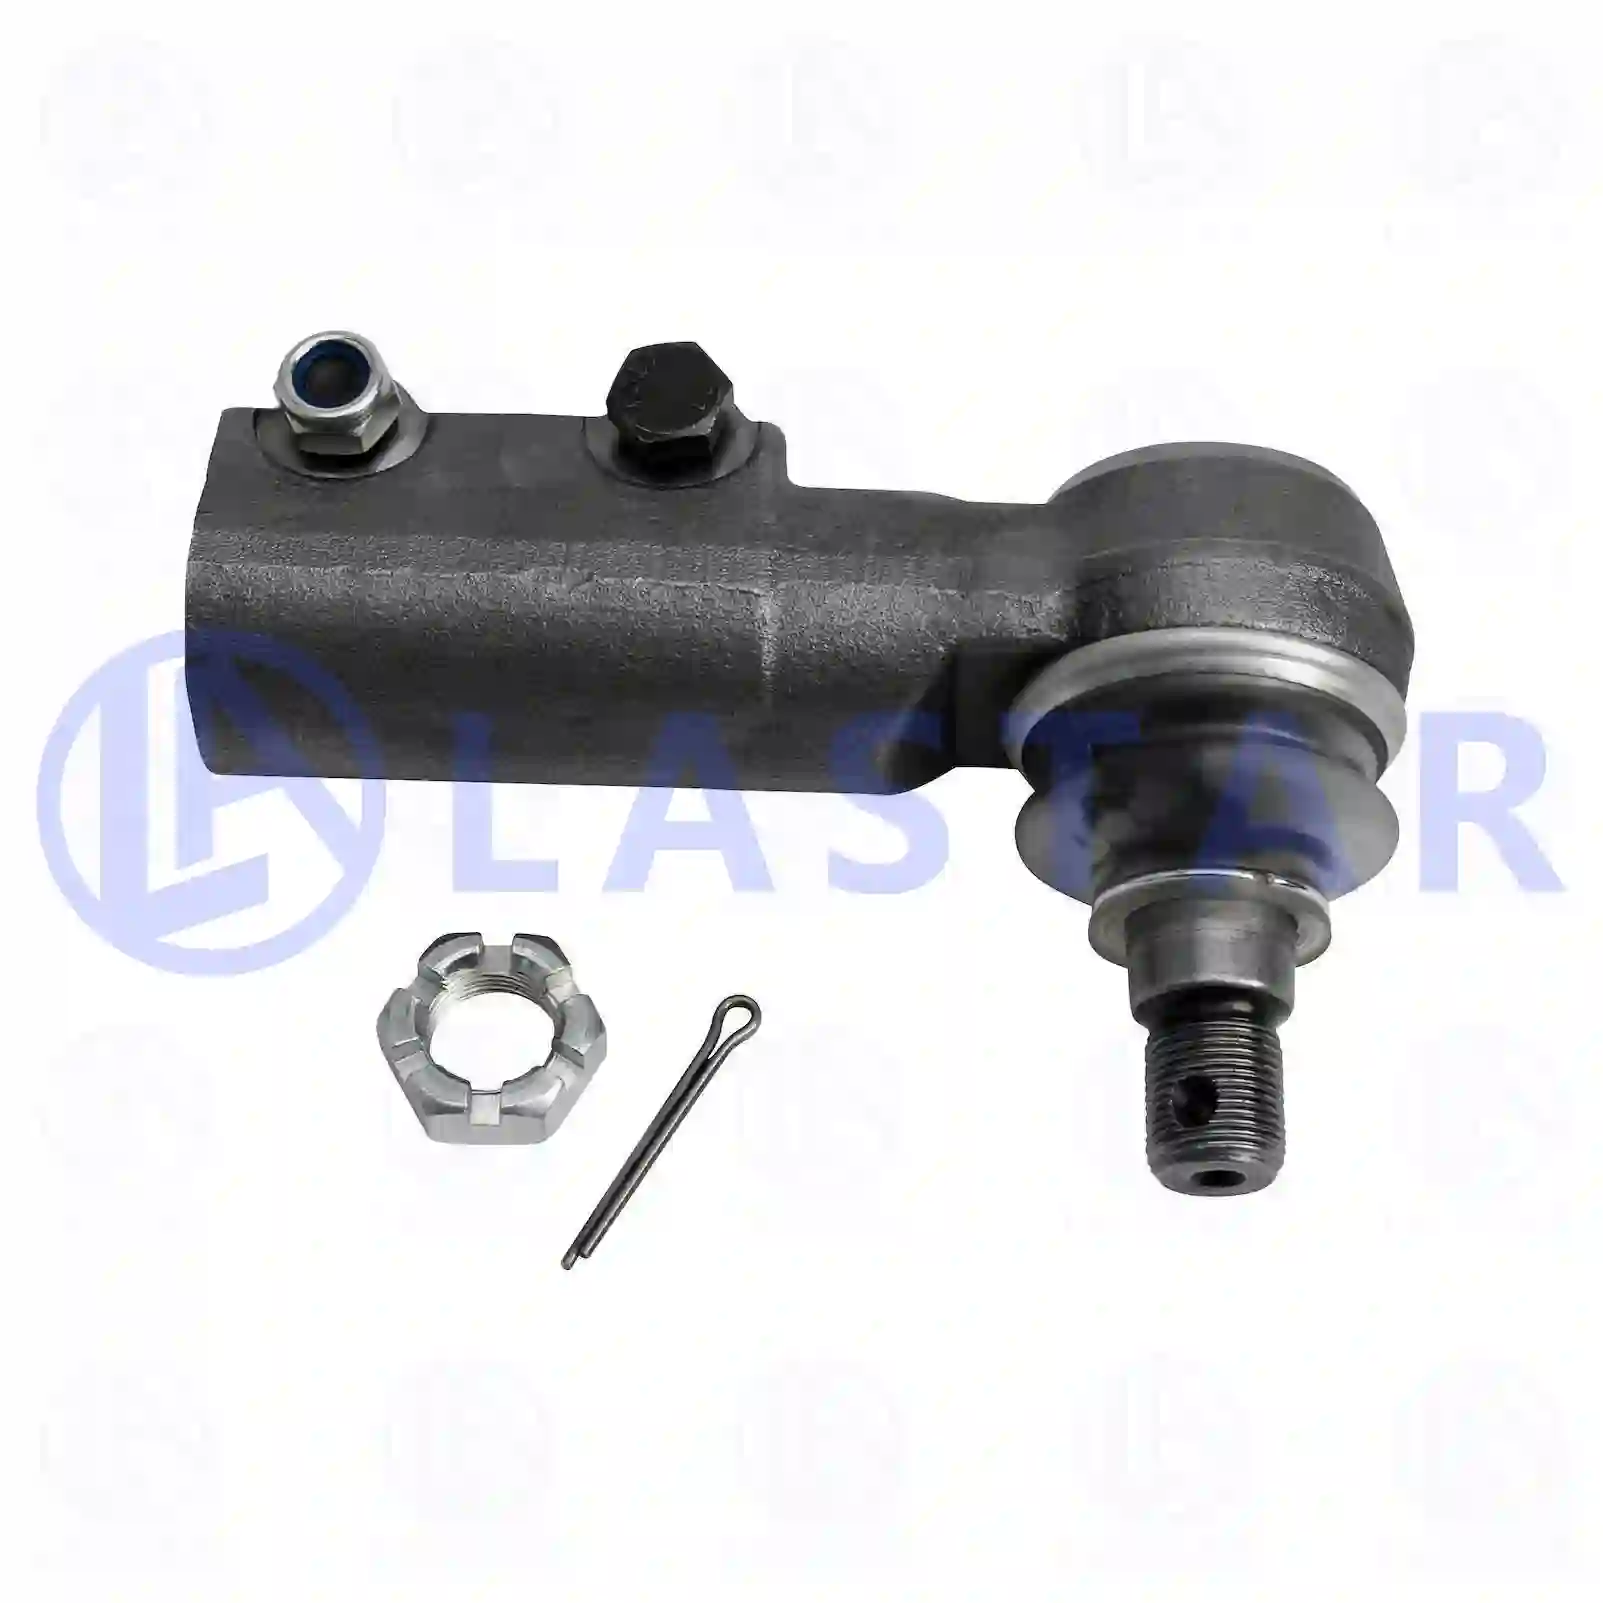 Ball joint, right hand thread, 77705366, 0003302835, 0003304035, 0003307735, 0003384929, 0013302135, 0013302635, 0013303235, 0013304035, 013302135 ||  77705366 Lastar Spare Part | Truck Spare Parts, Auotomotive Spare Parts Ball joint, right hand thread, 77705366, 0003302835, 0003304035, 0003307735, 0003384929, 0013302135, 0013302635, 0013303235, 0013304035, 013302135 ||  77705366 Lastar Spare Part | Truck Spare Parts, Auotomotive Spare Parts